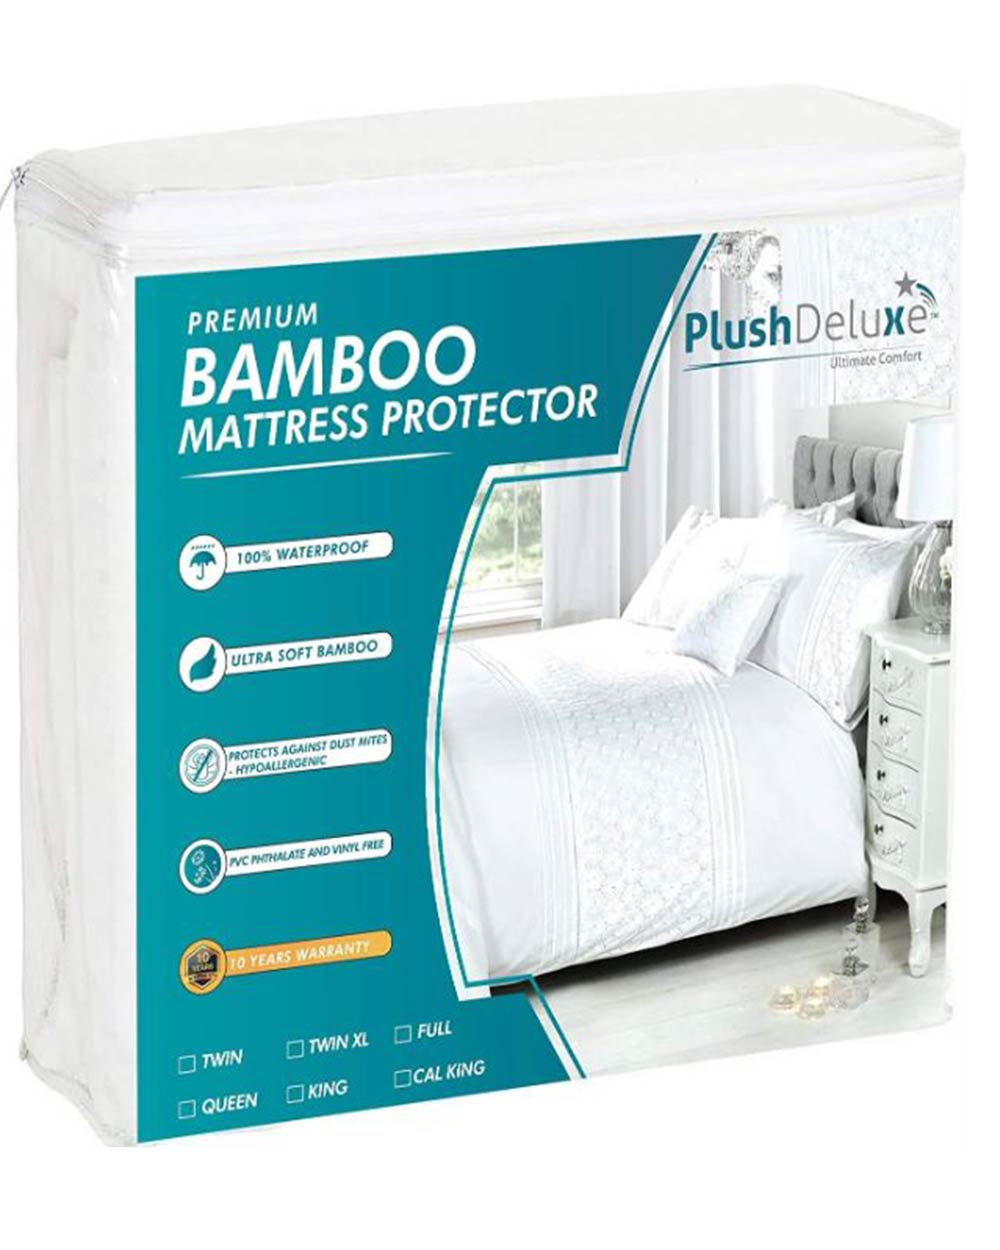 Premium bamboo mattress protector super king soft Plus deluxe in packaging